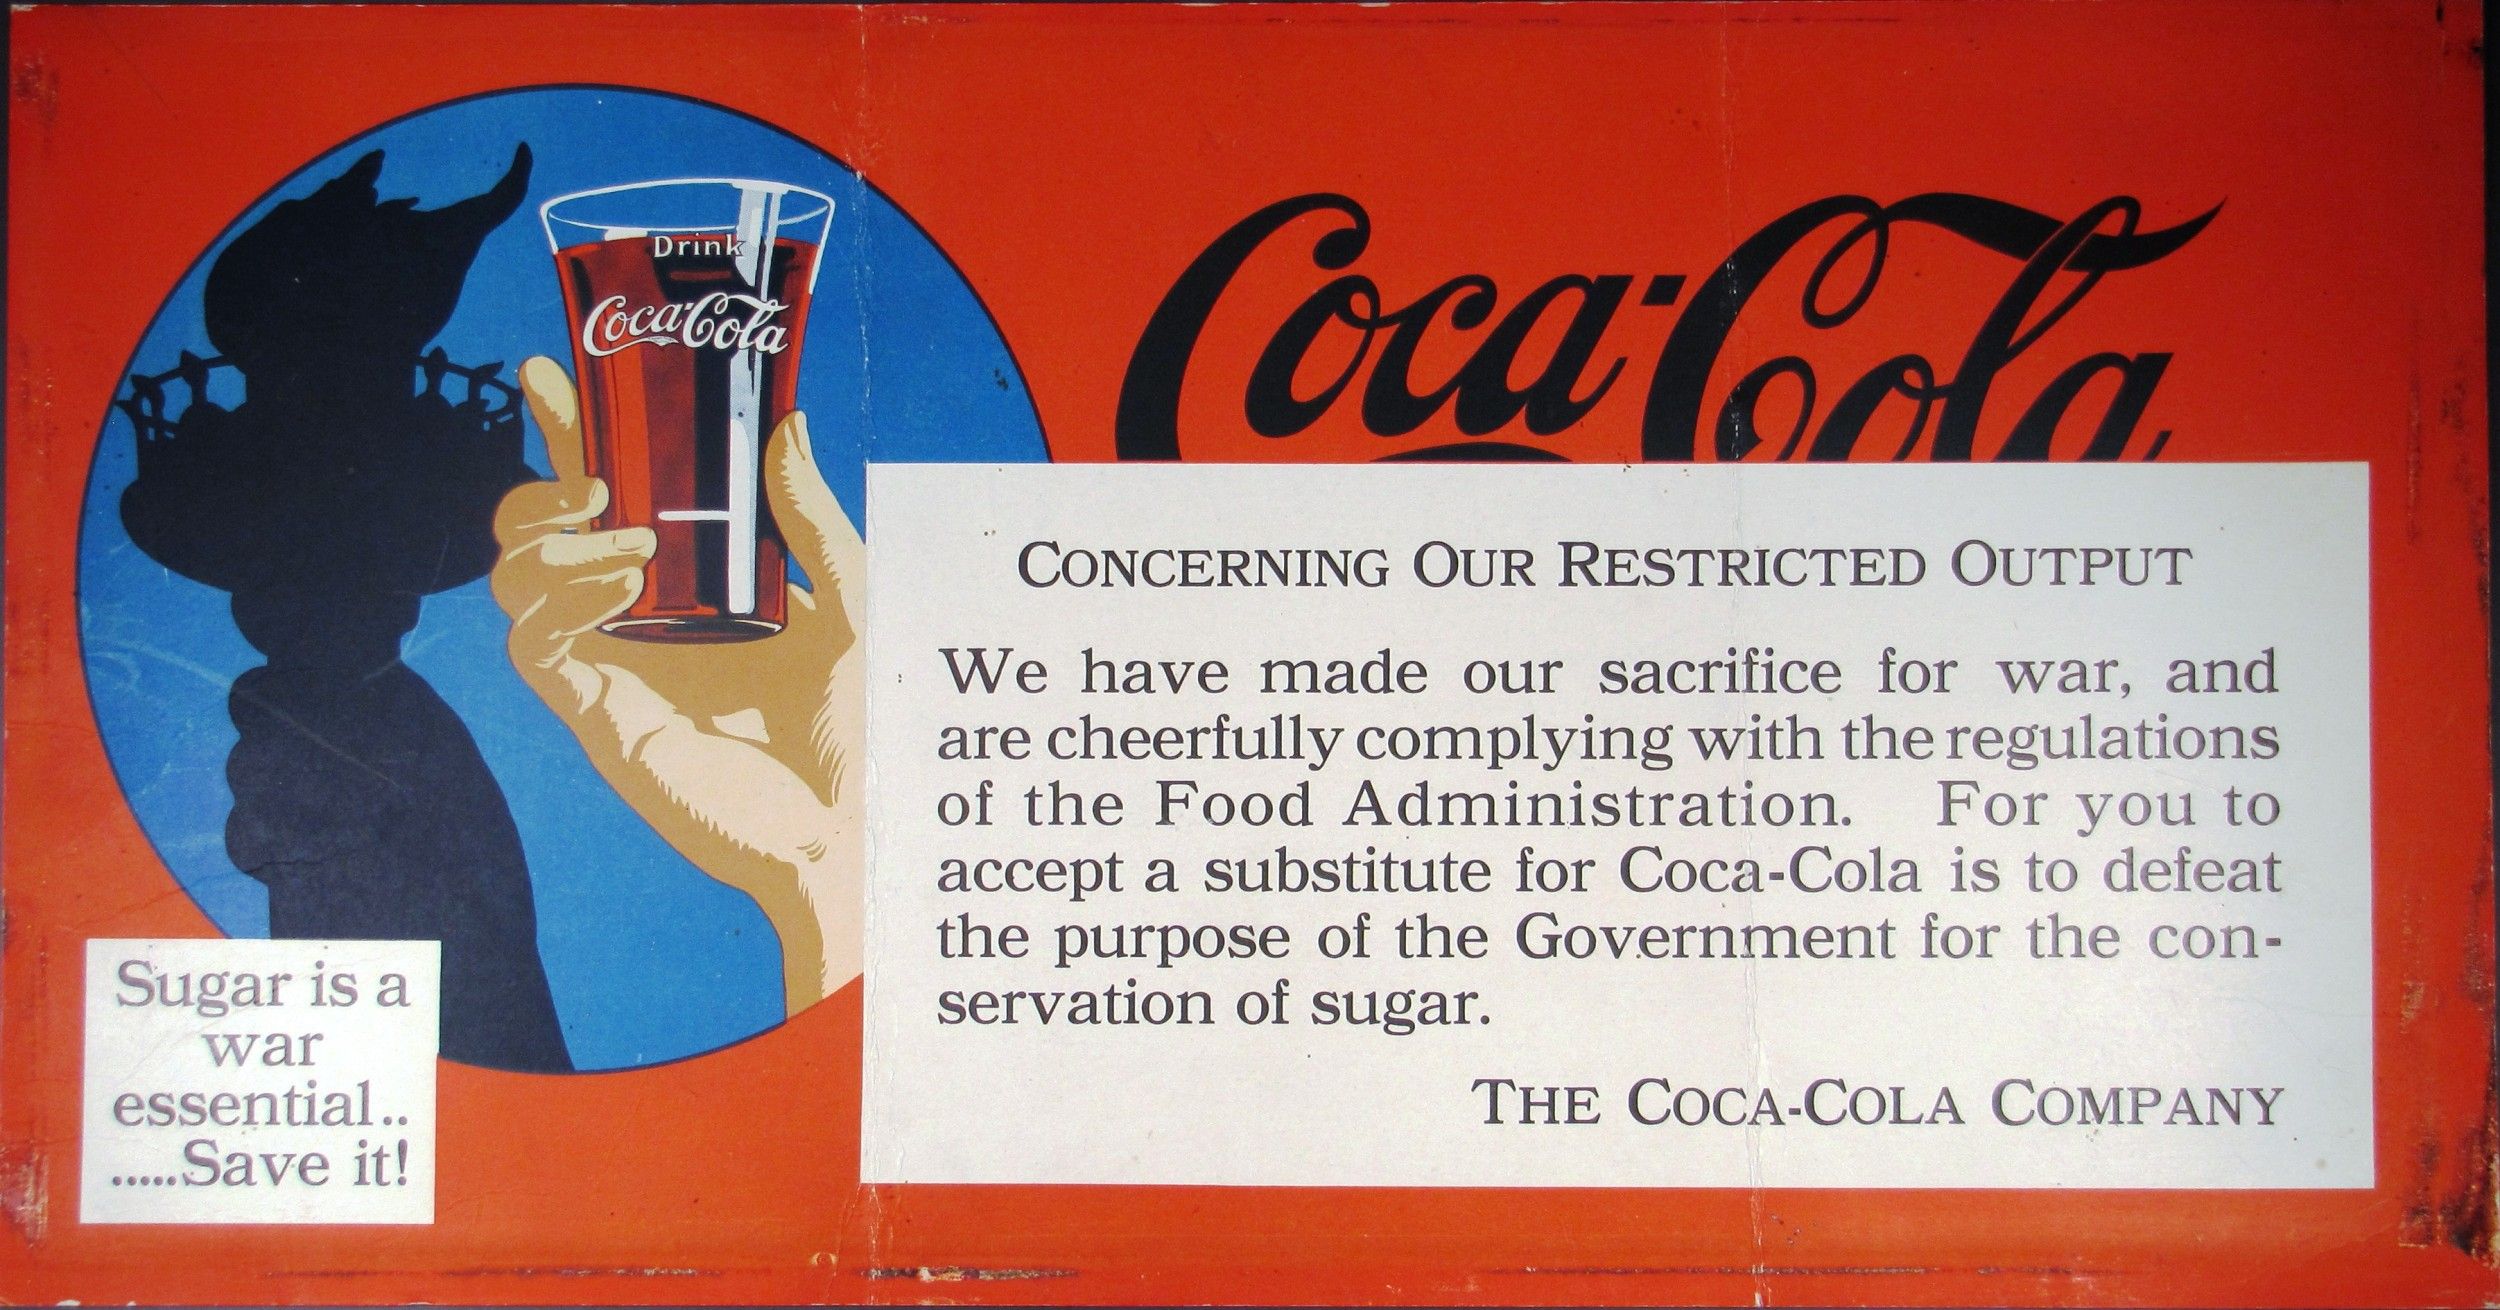  Coca-Cola is stating their compliance with the WWI food regulations. - History By Mail